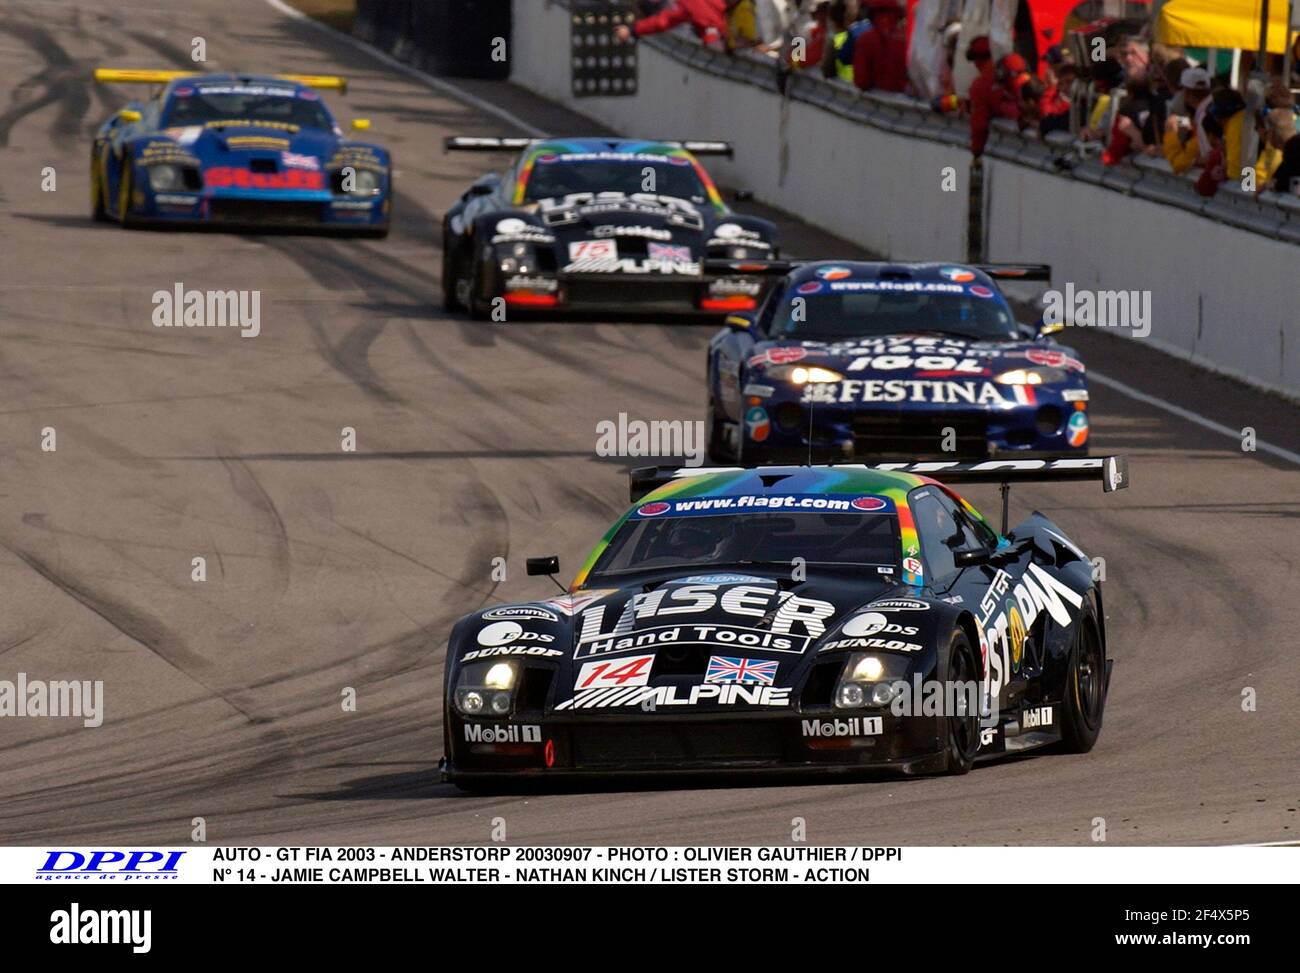 AUTO - GT FIA 2003 - ANDERSTORP 20030907 - PHOTO : OLIVIER GAUTHIER / DPPI N° 14 - JAMIE CAMPBELL WALTER - NATHAN KINCH / LISTER STORM - ACTION Stock Photo